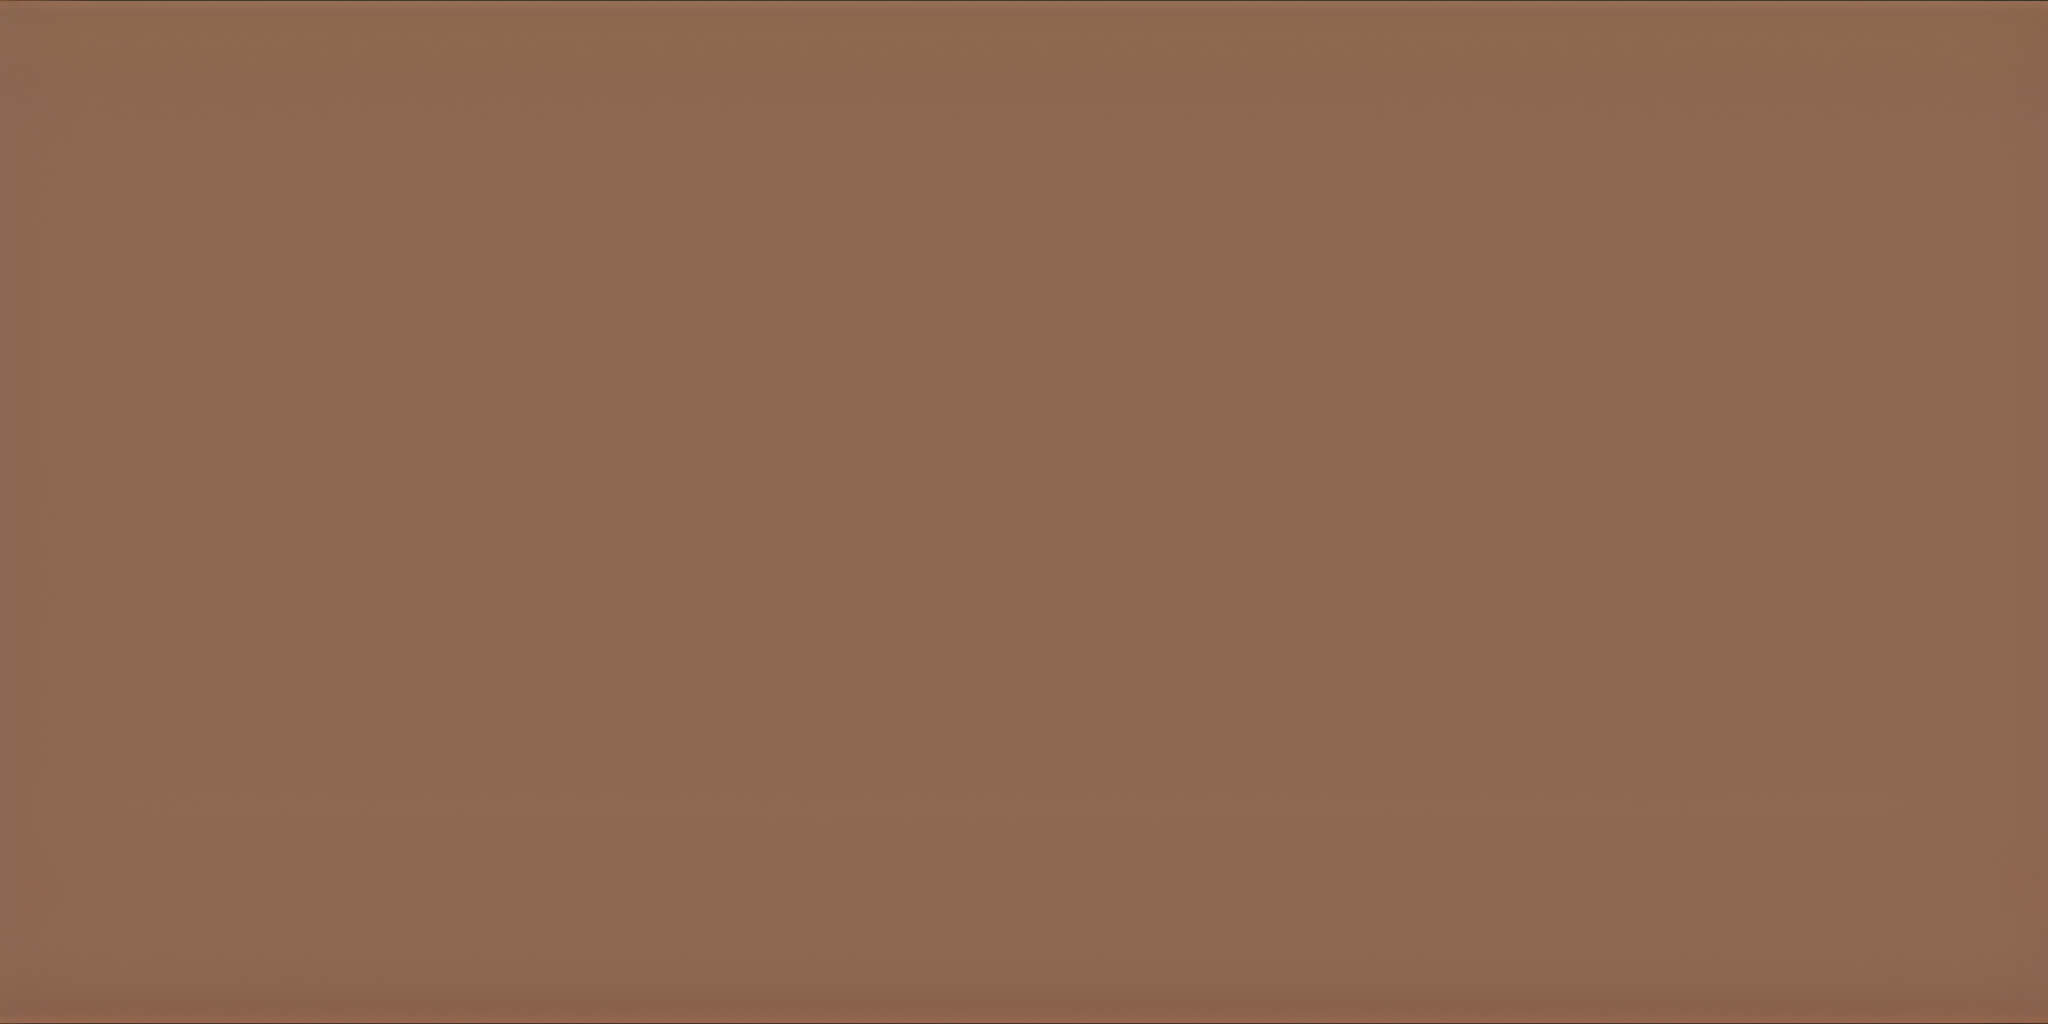 SAICOS Bel Air opaque Special Wood Colour solvent free 7280 Greyish Brown, 0.125 L